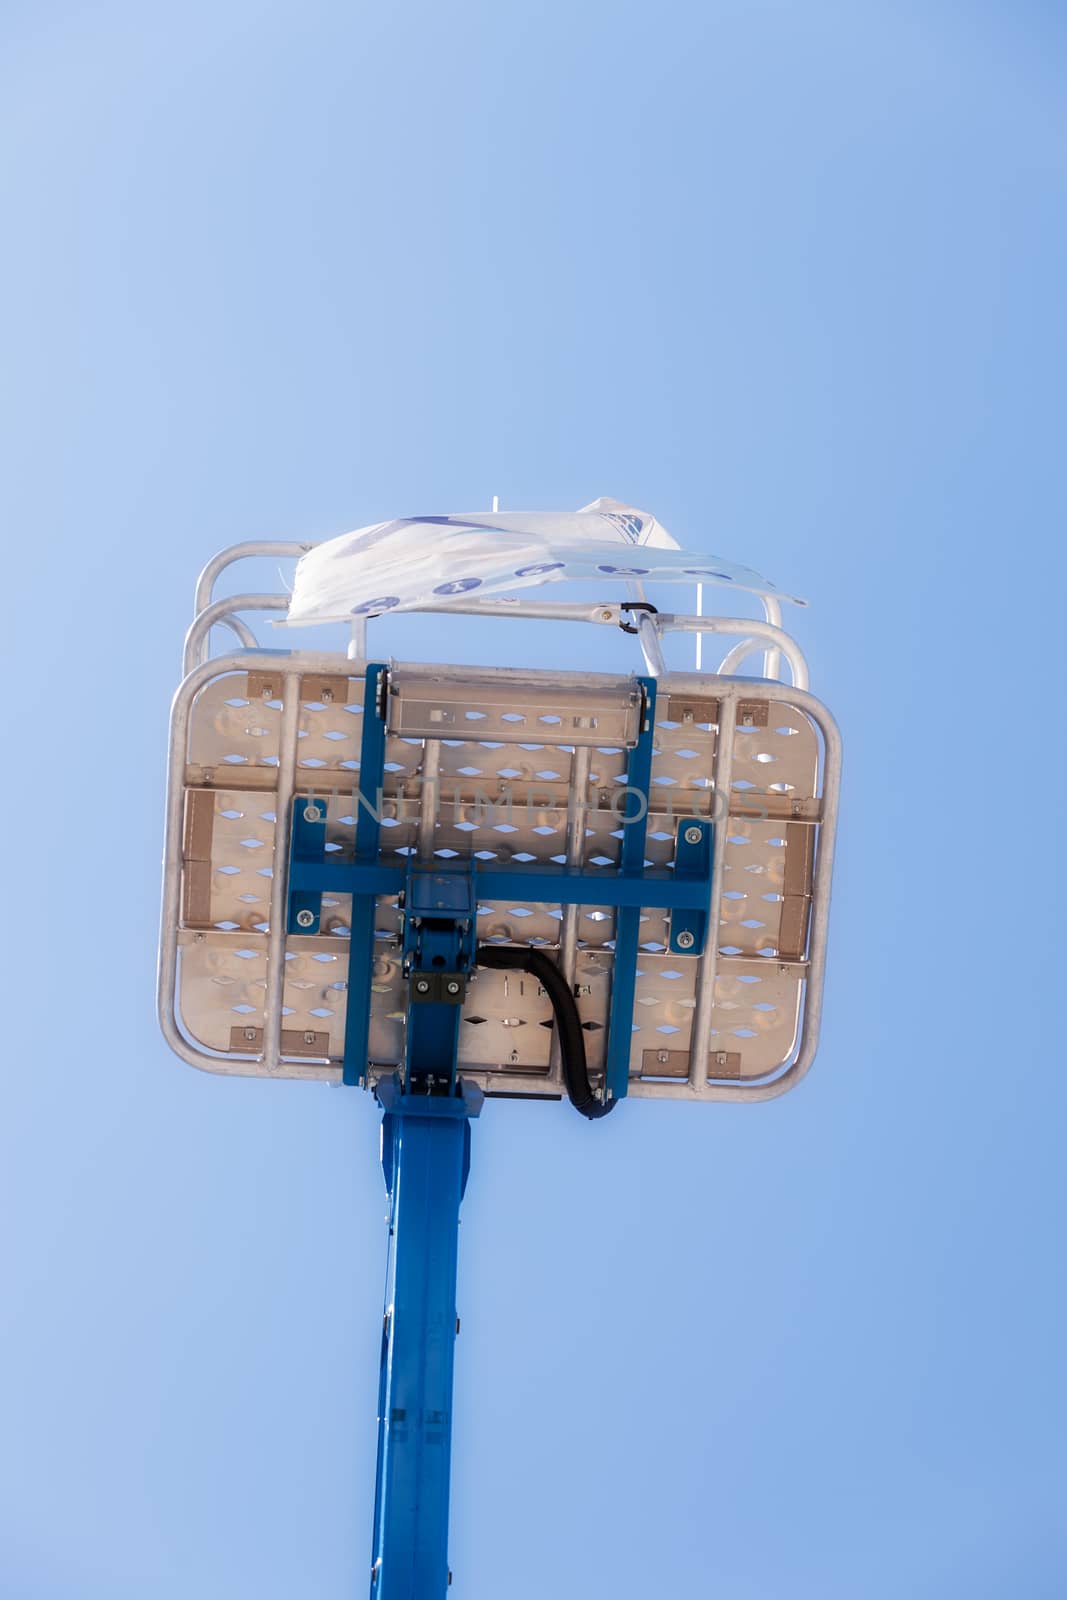 Crane with basket on the blue background, note shallow depth of field